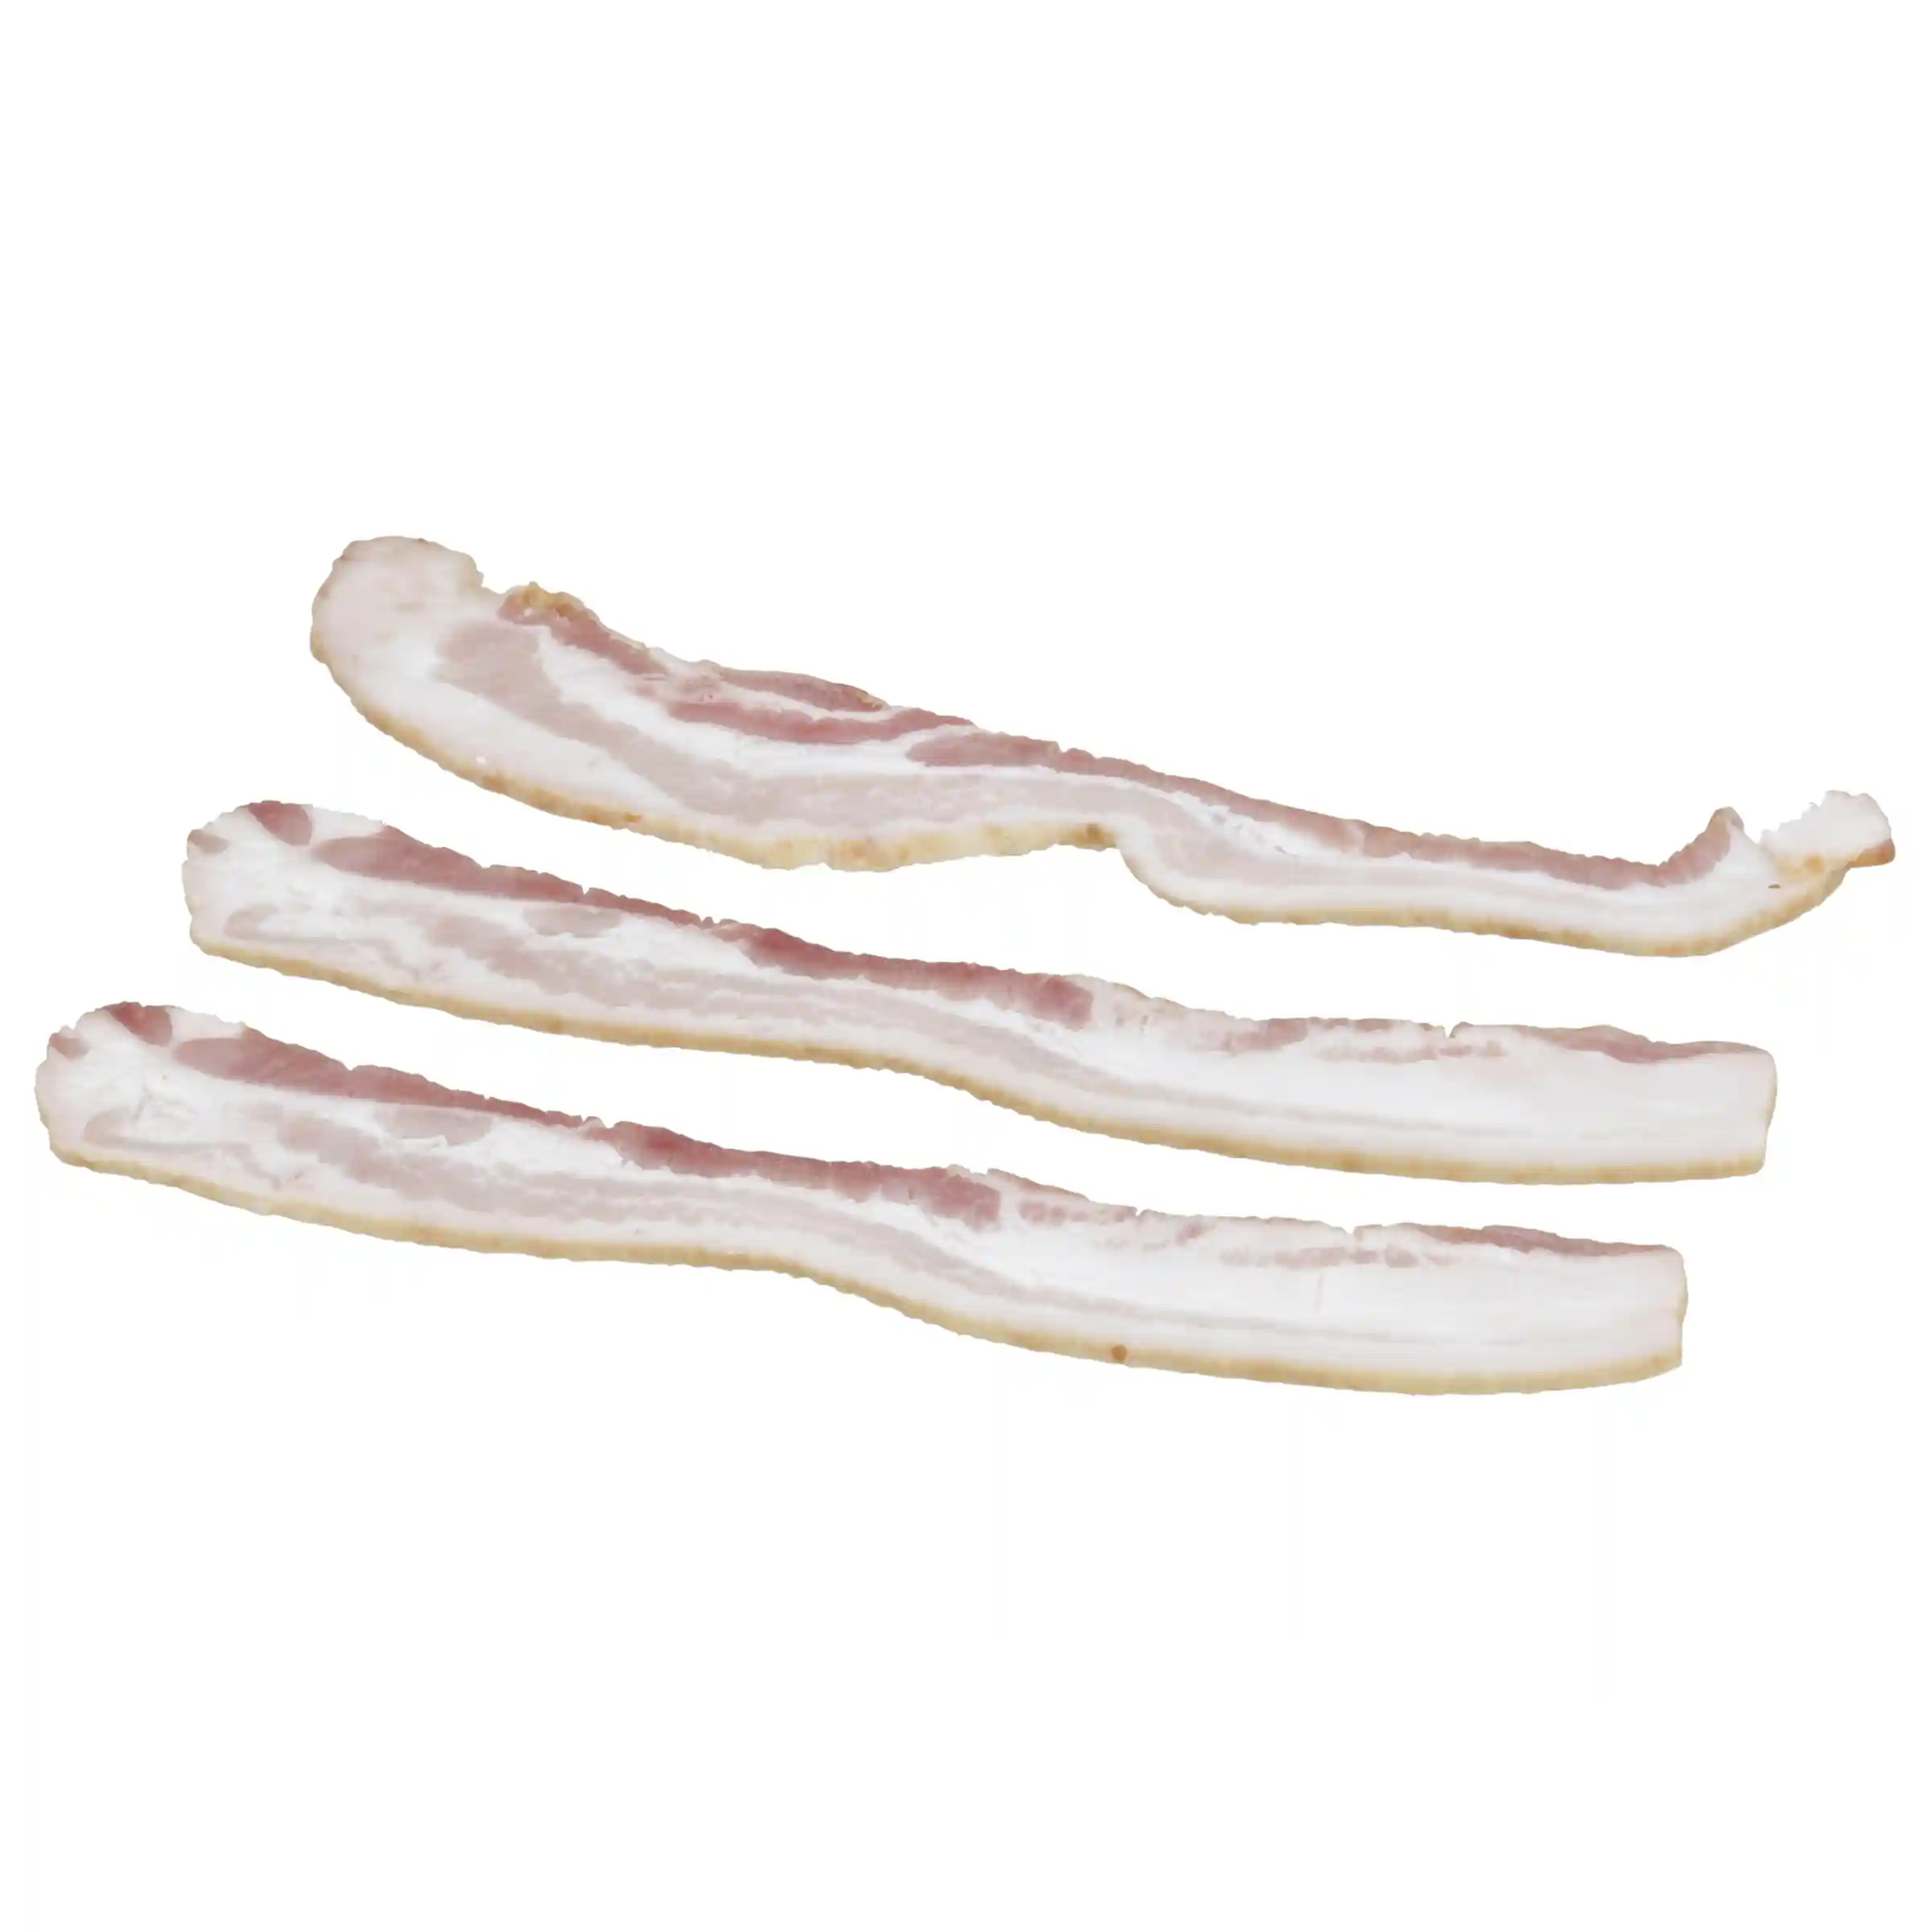 Wright® Brand Naturally Hickory Smoked Regular Sliced Bacon, Bulk, 33 Lbs, 6 Slices/Inch, Frozen_image_11